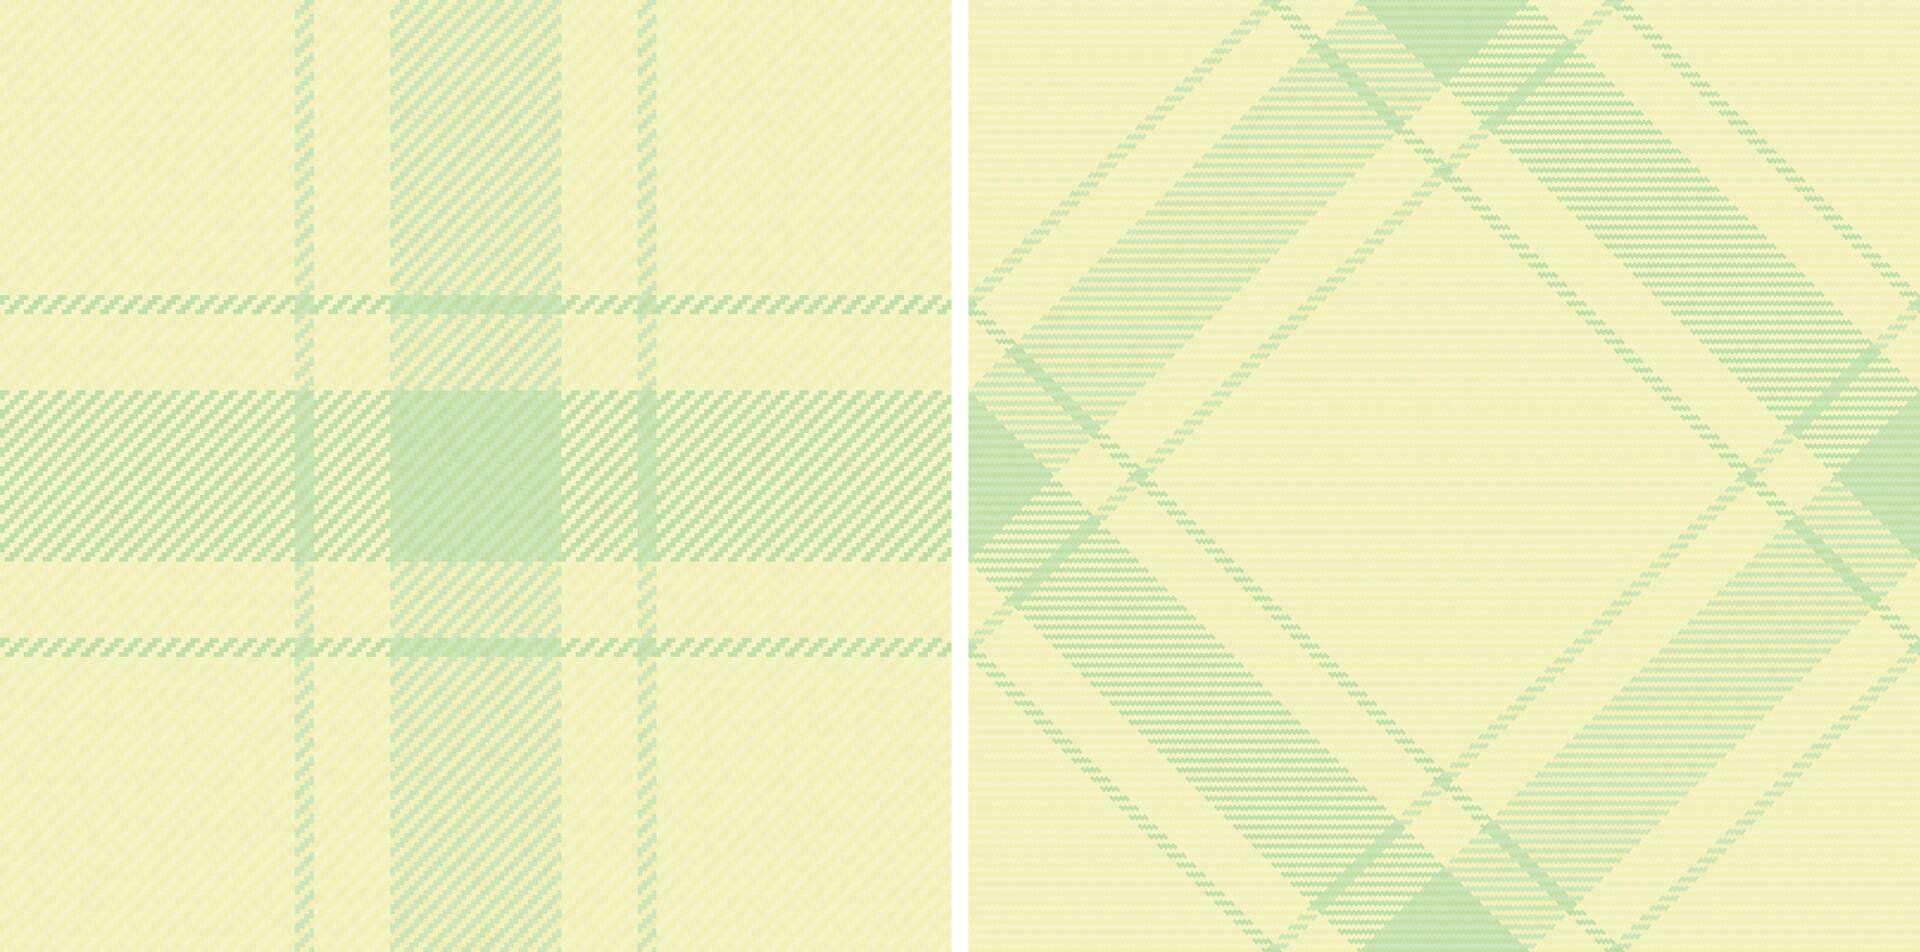 Texture tartan seamless of fabric plaid pattern with a background textile vector check.